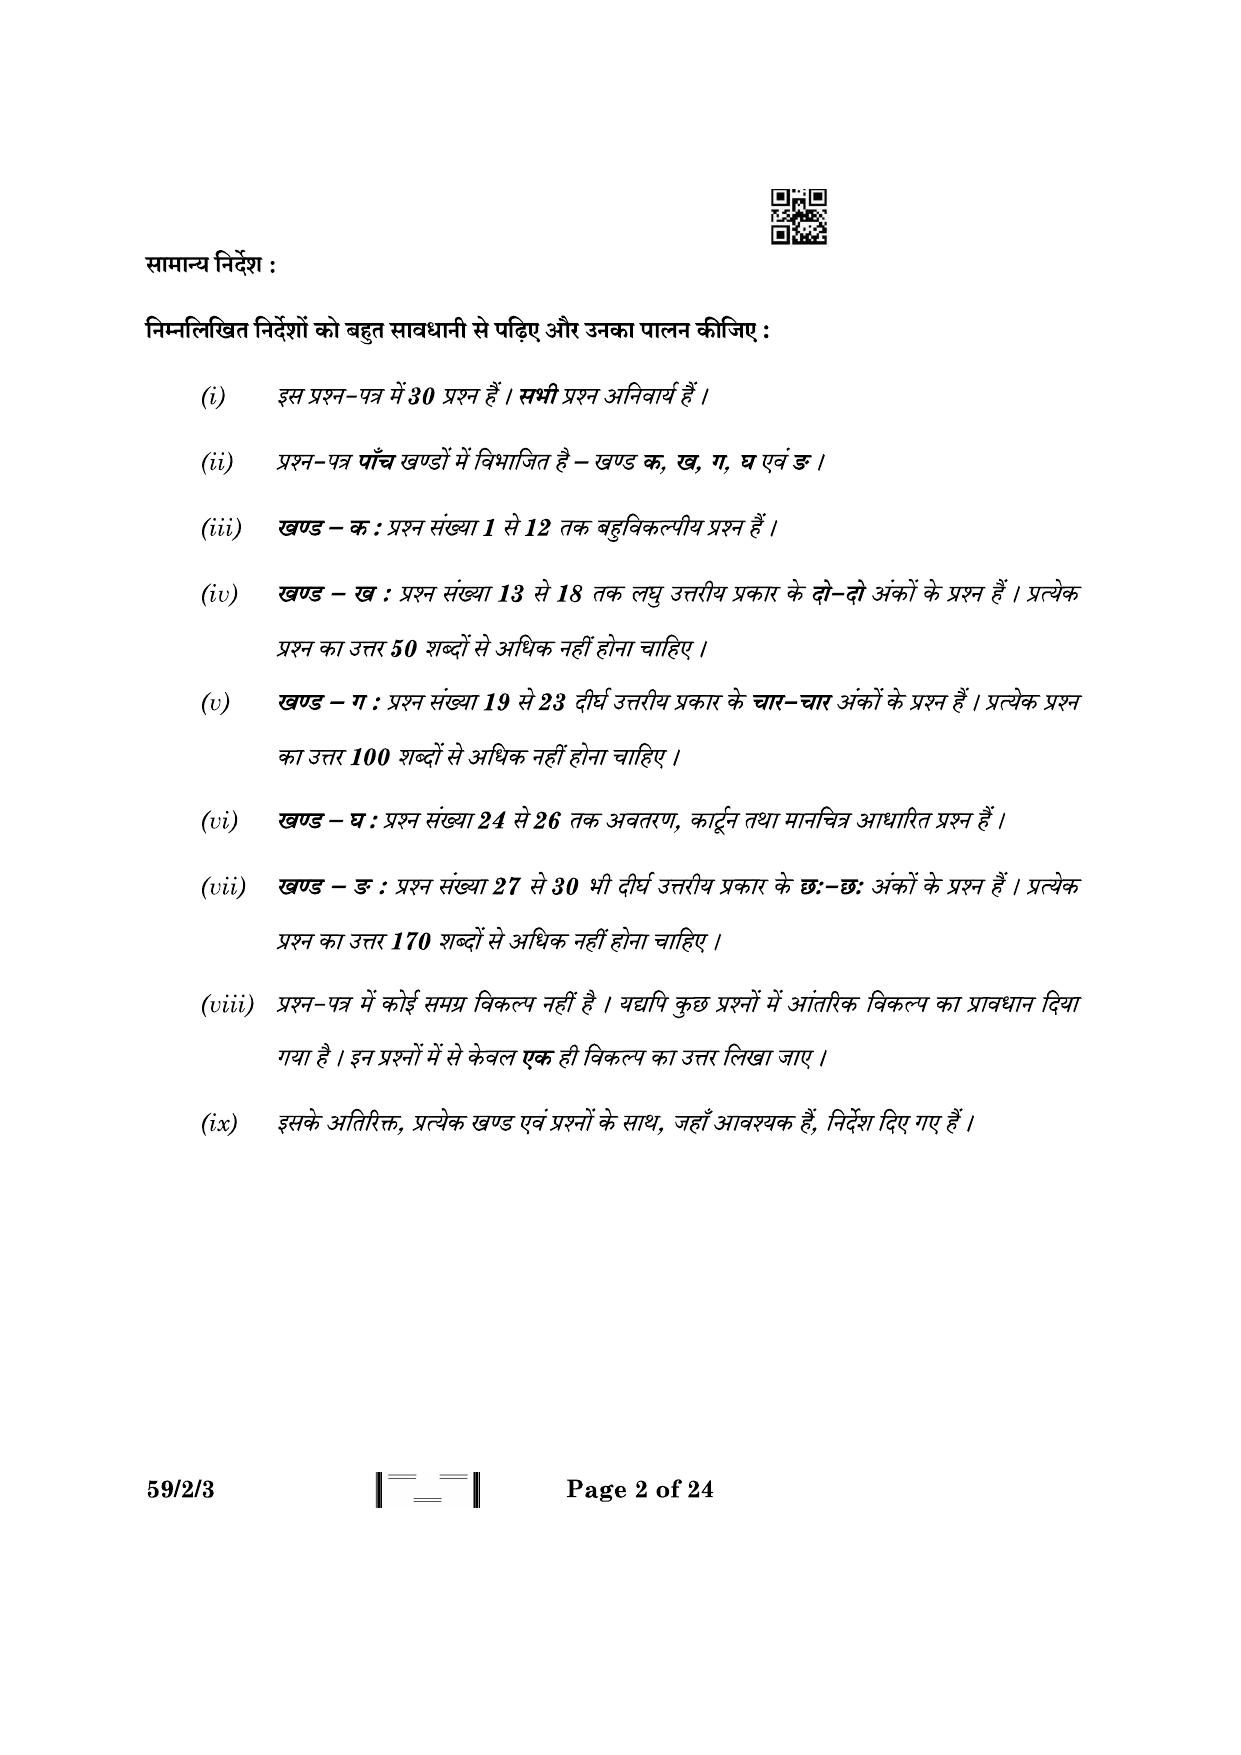 CBSE Class 12 59-2-3 Political Science 2023 Question Paper - Page 2